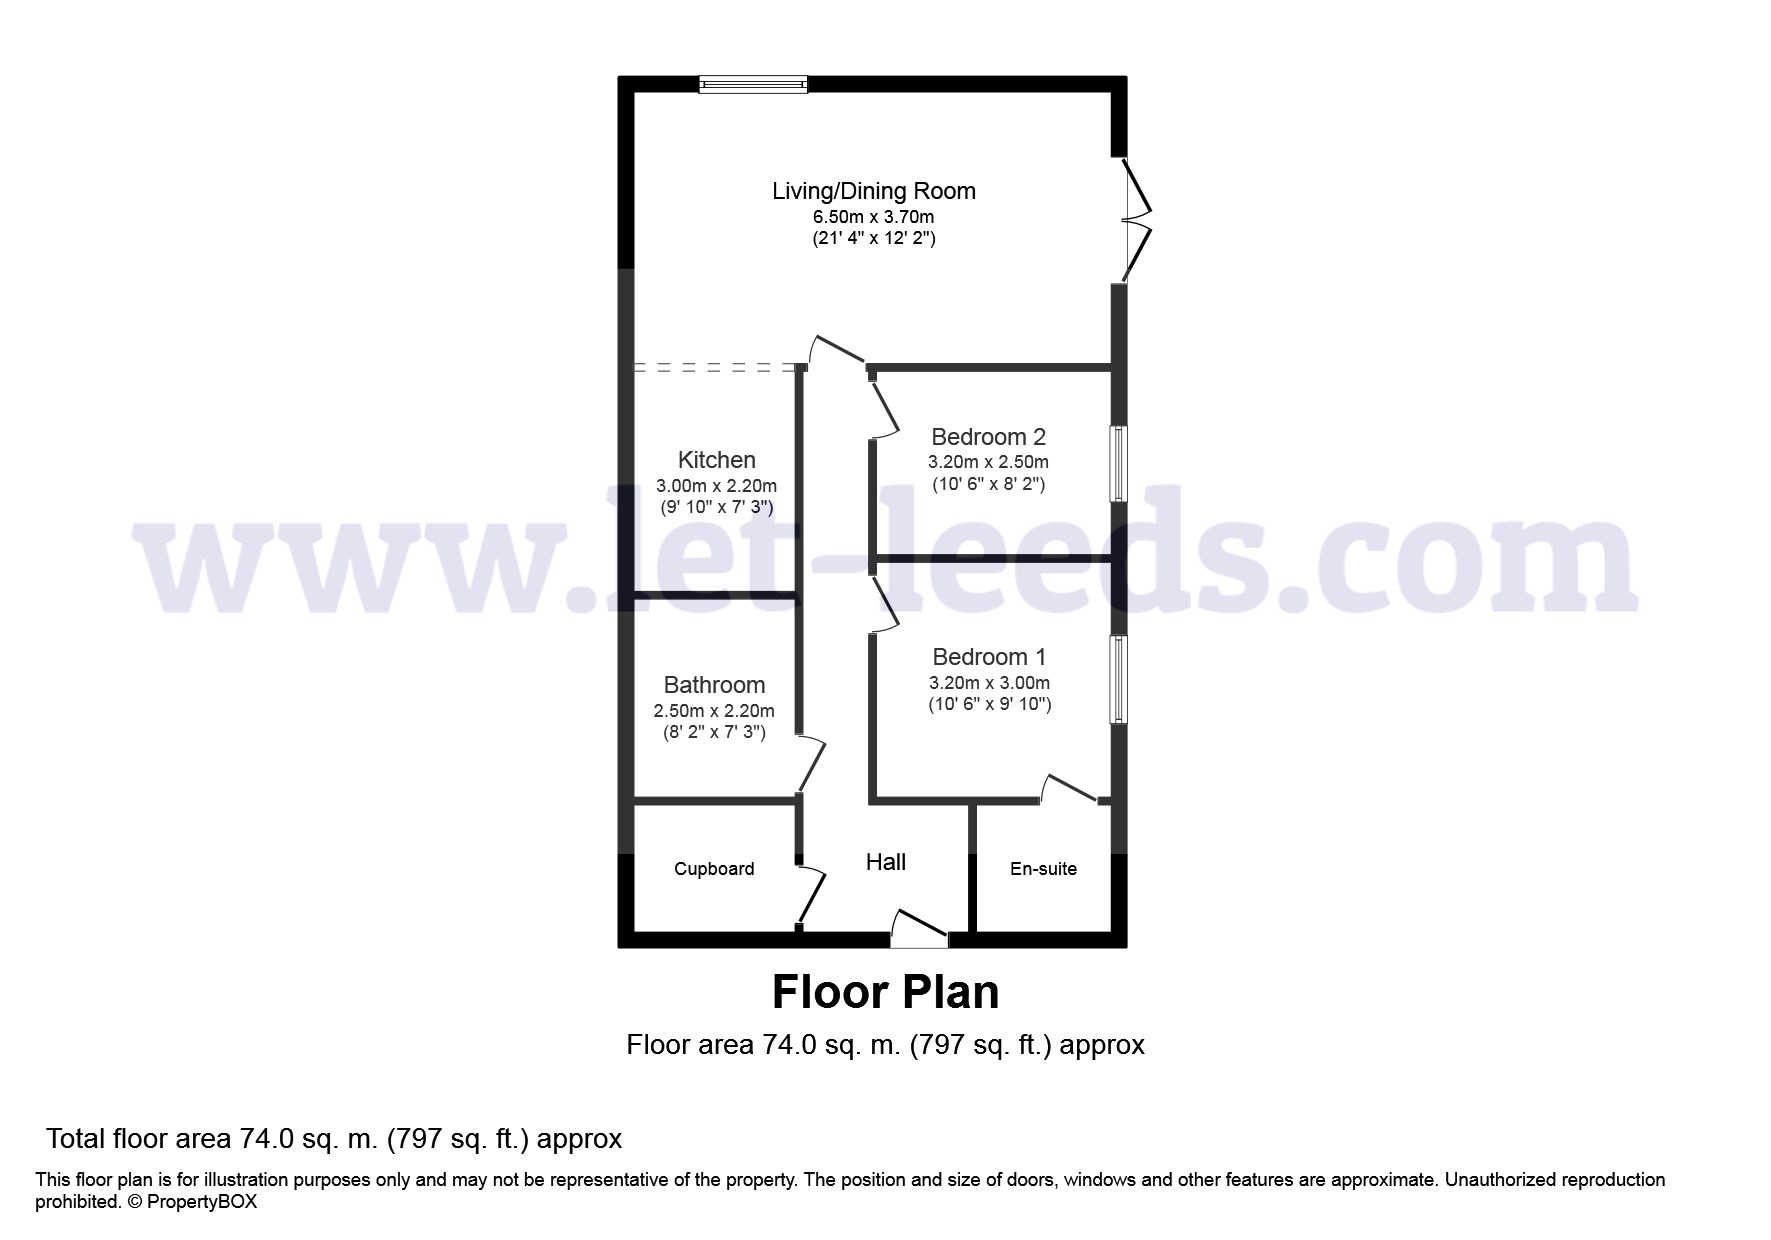 2 Bedrooms Flat for sale in Eyres Mill Side, Armley, Leeds LS12